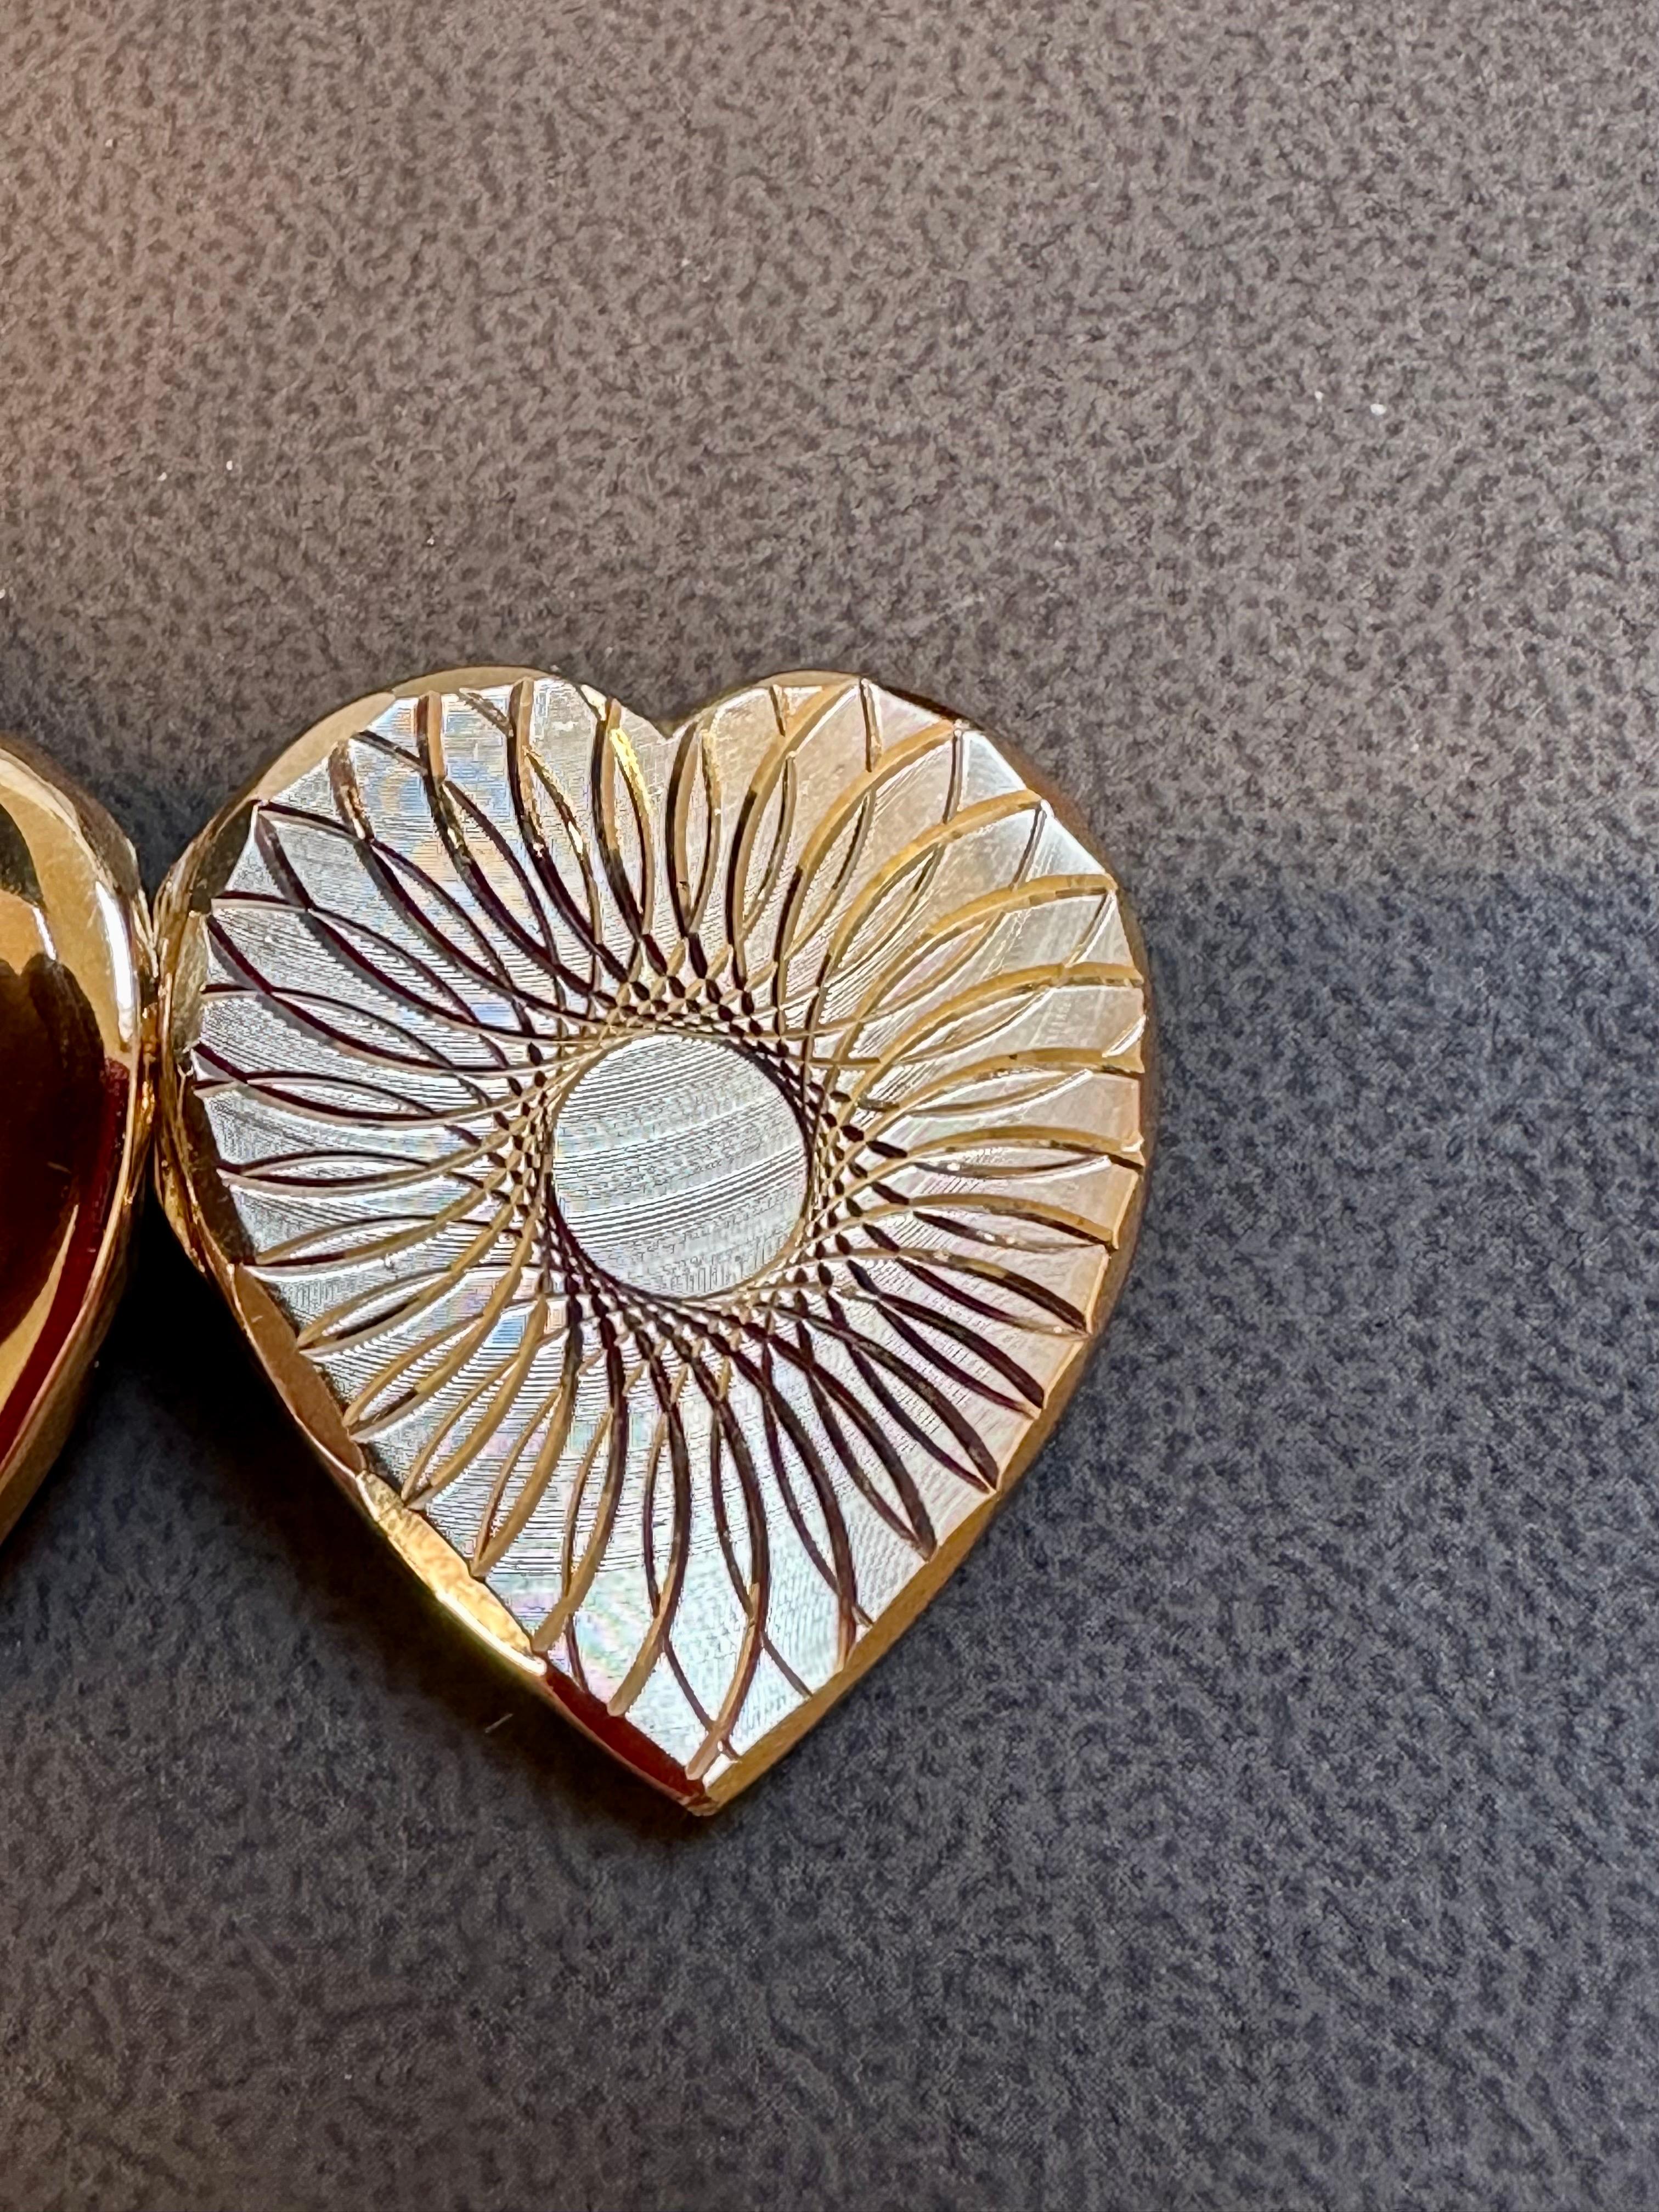 This vintage heart locket is a beautiful piece of jewelry crafted from 18 karat yellow gold. The locket has space for two pictures or can be used to hold medicine, making it both functional and stylish. The locket is 1.2 inches wide and 1.3 inches